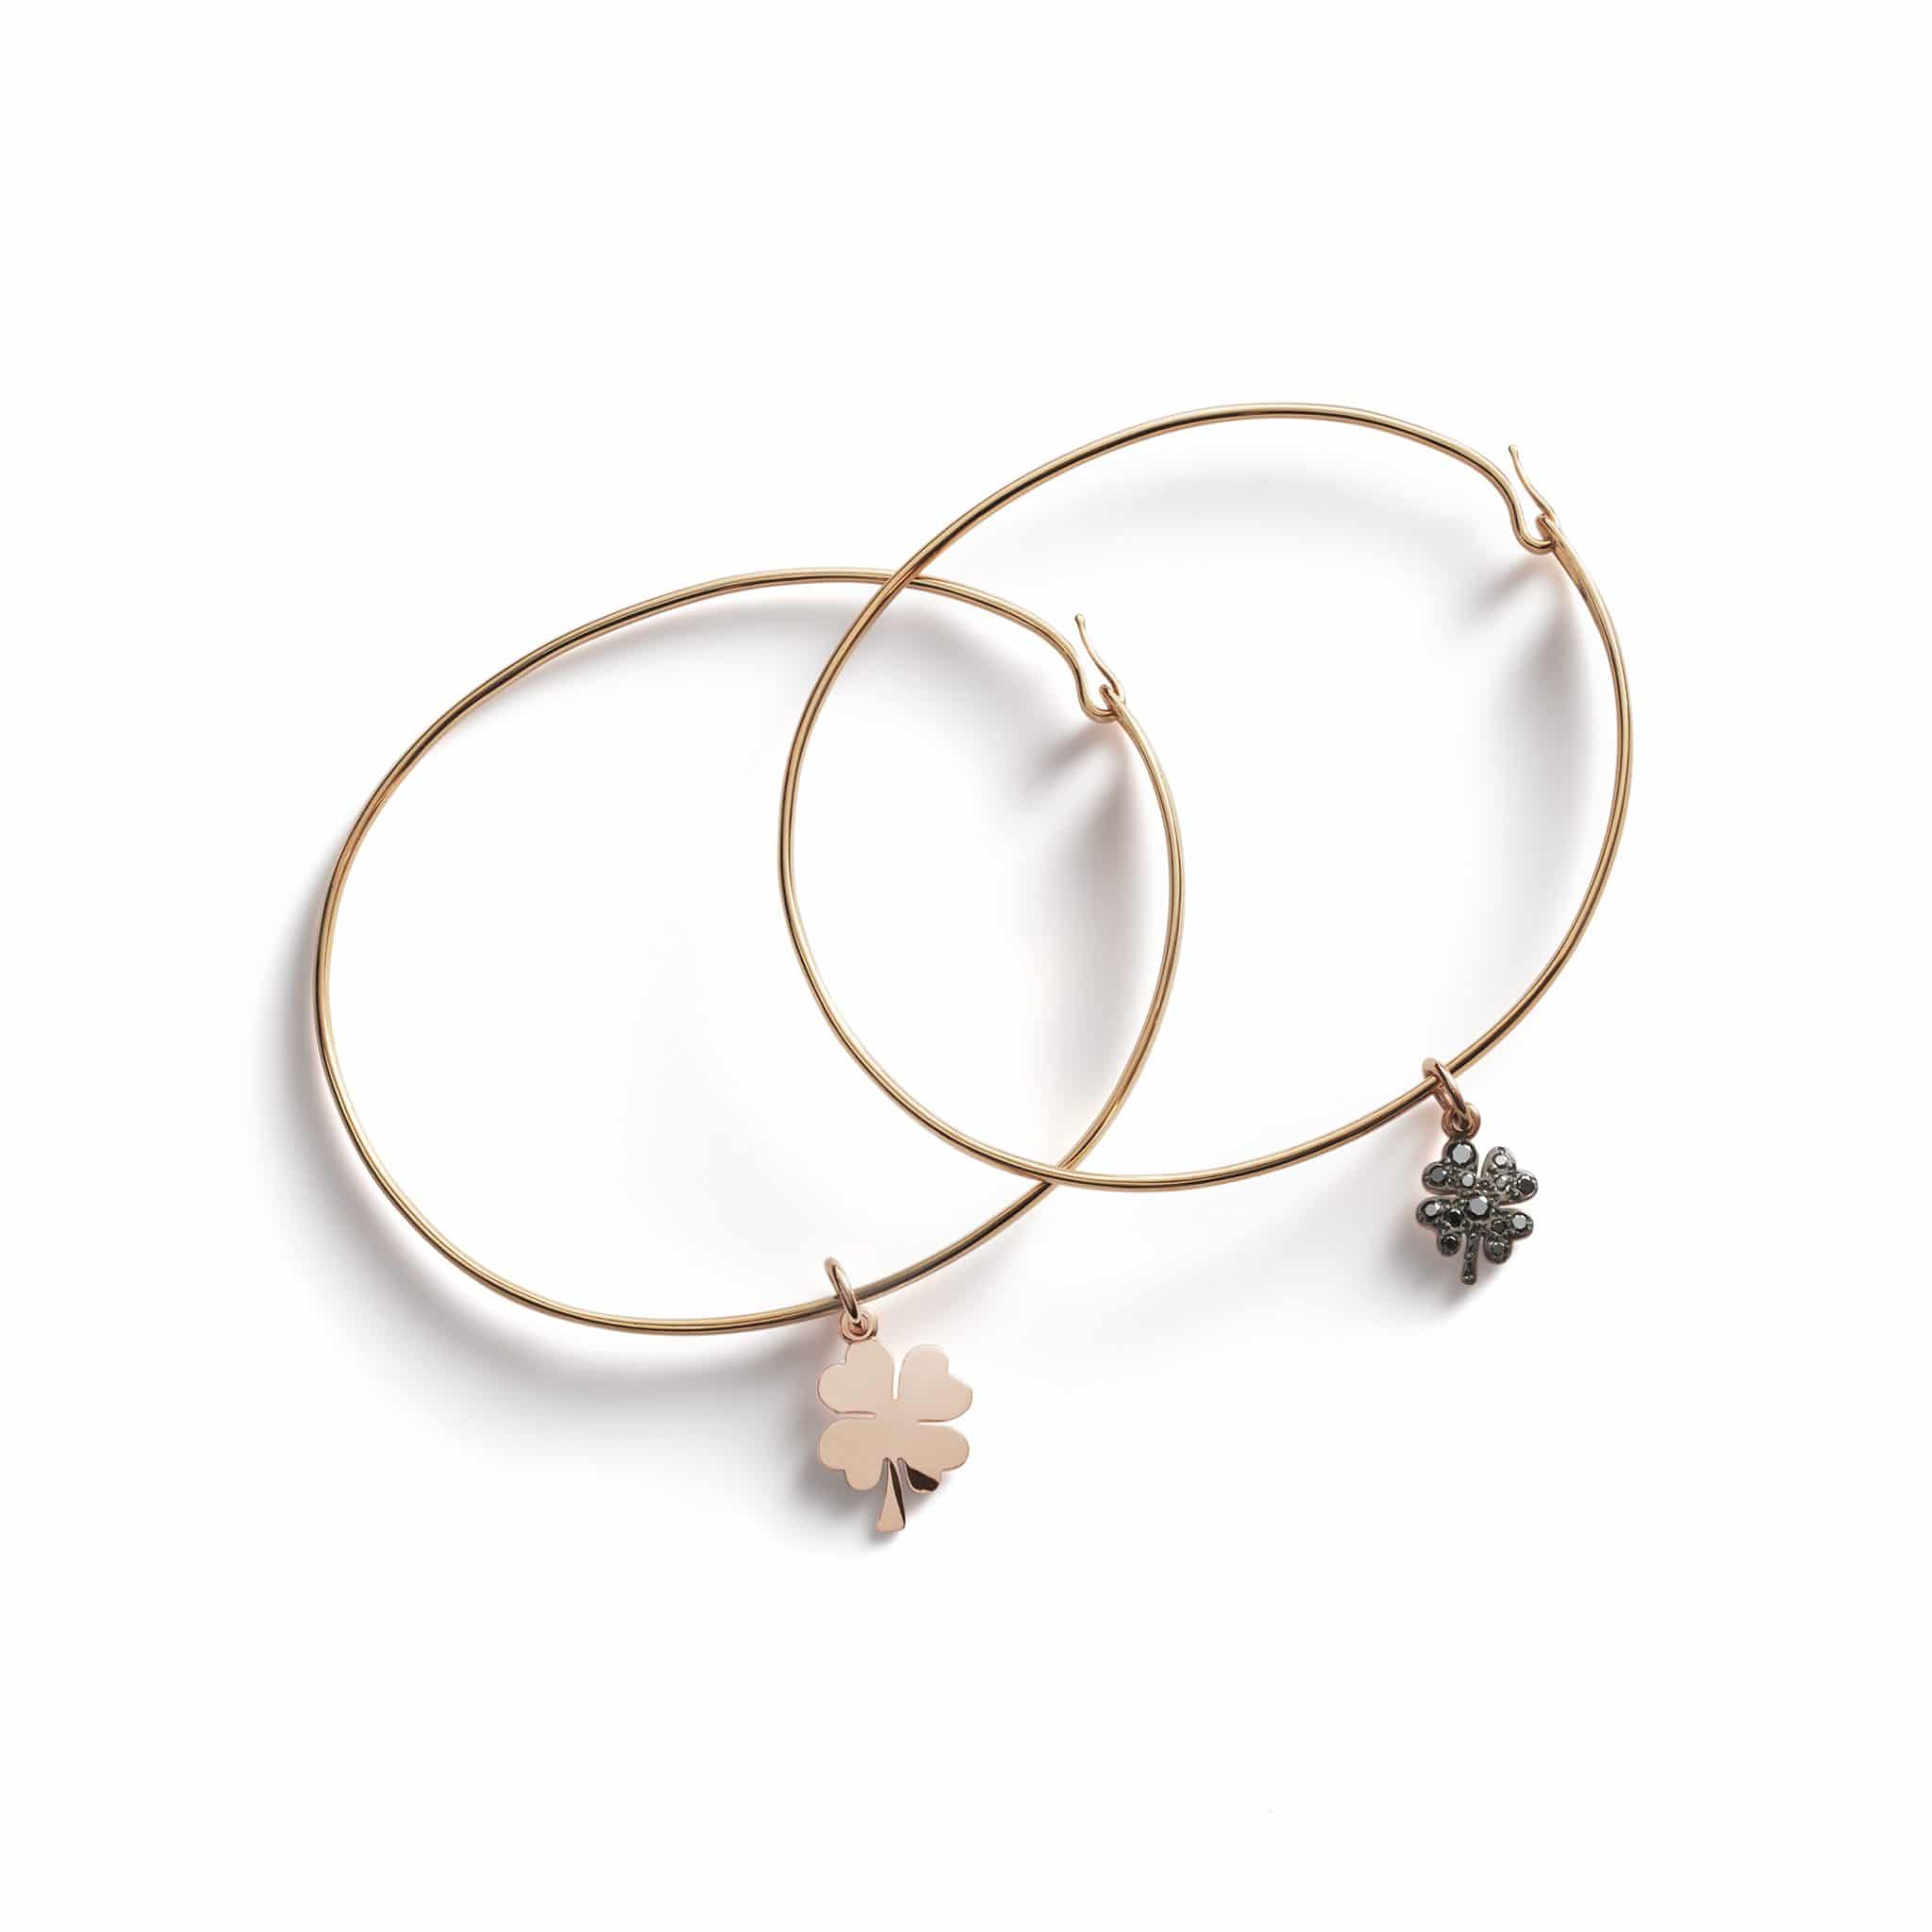 BANGLES-WITH-FOUR-LEAF-CLOVER-CHARMS-2